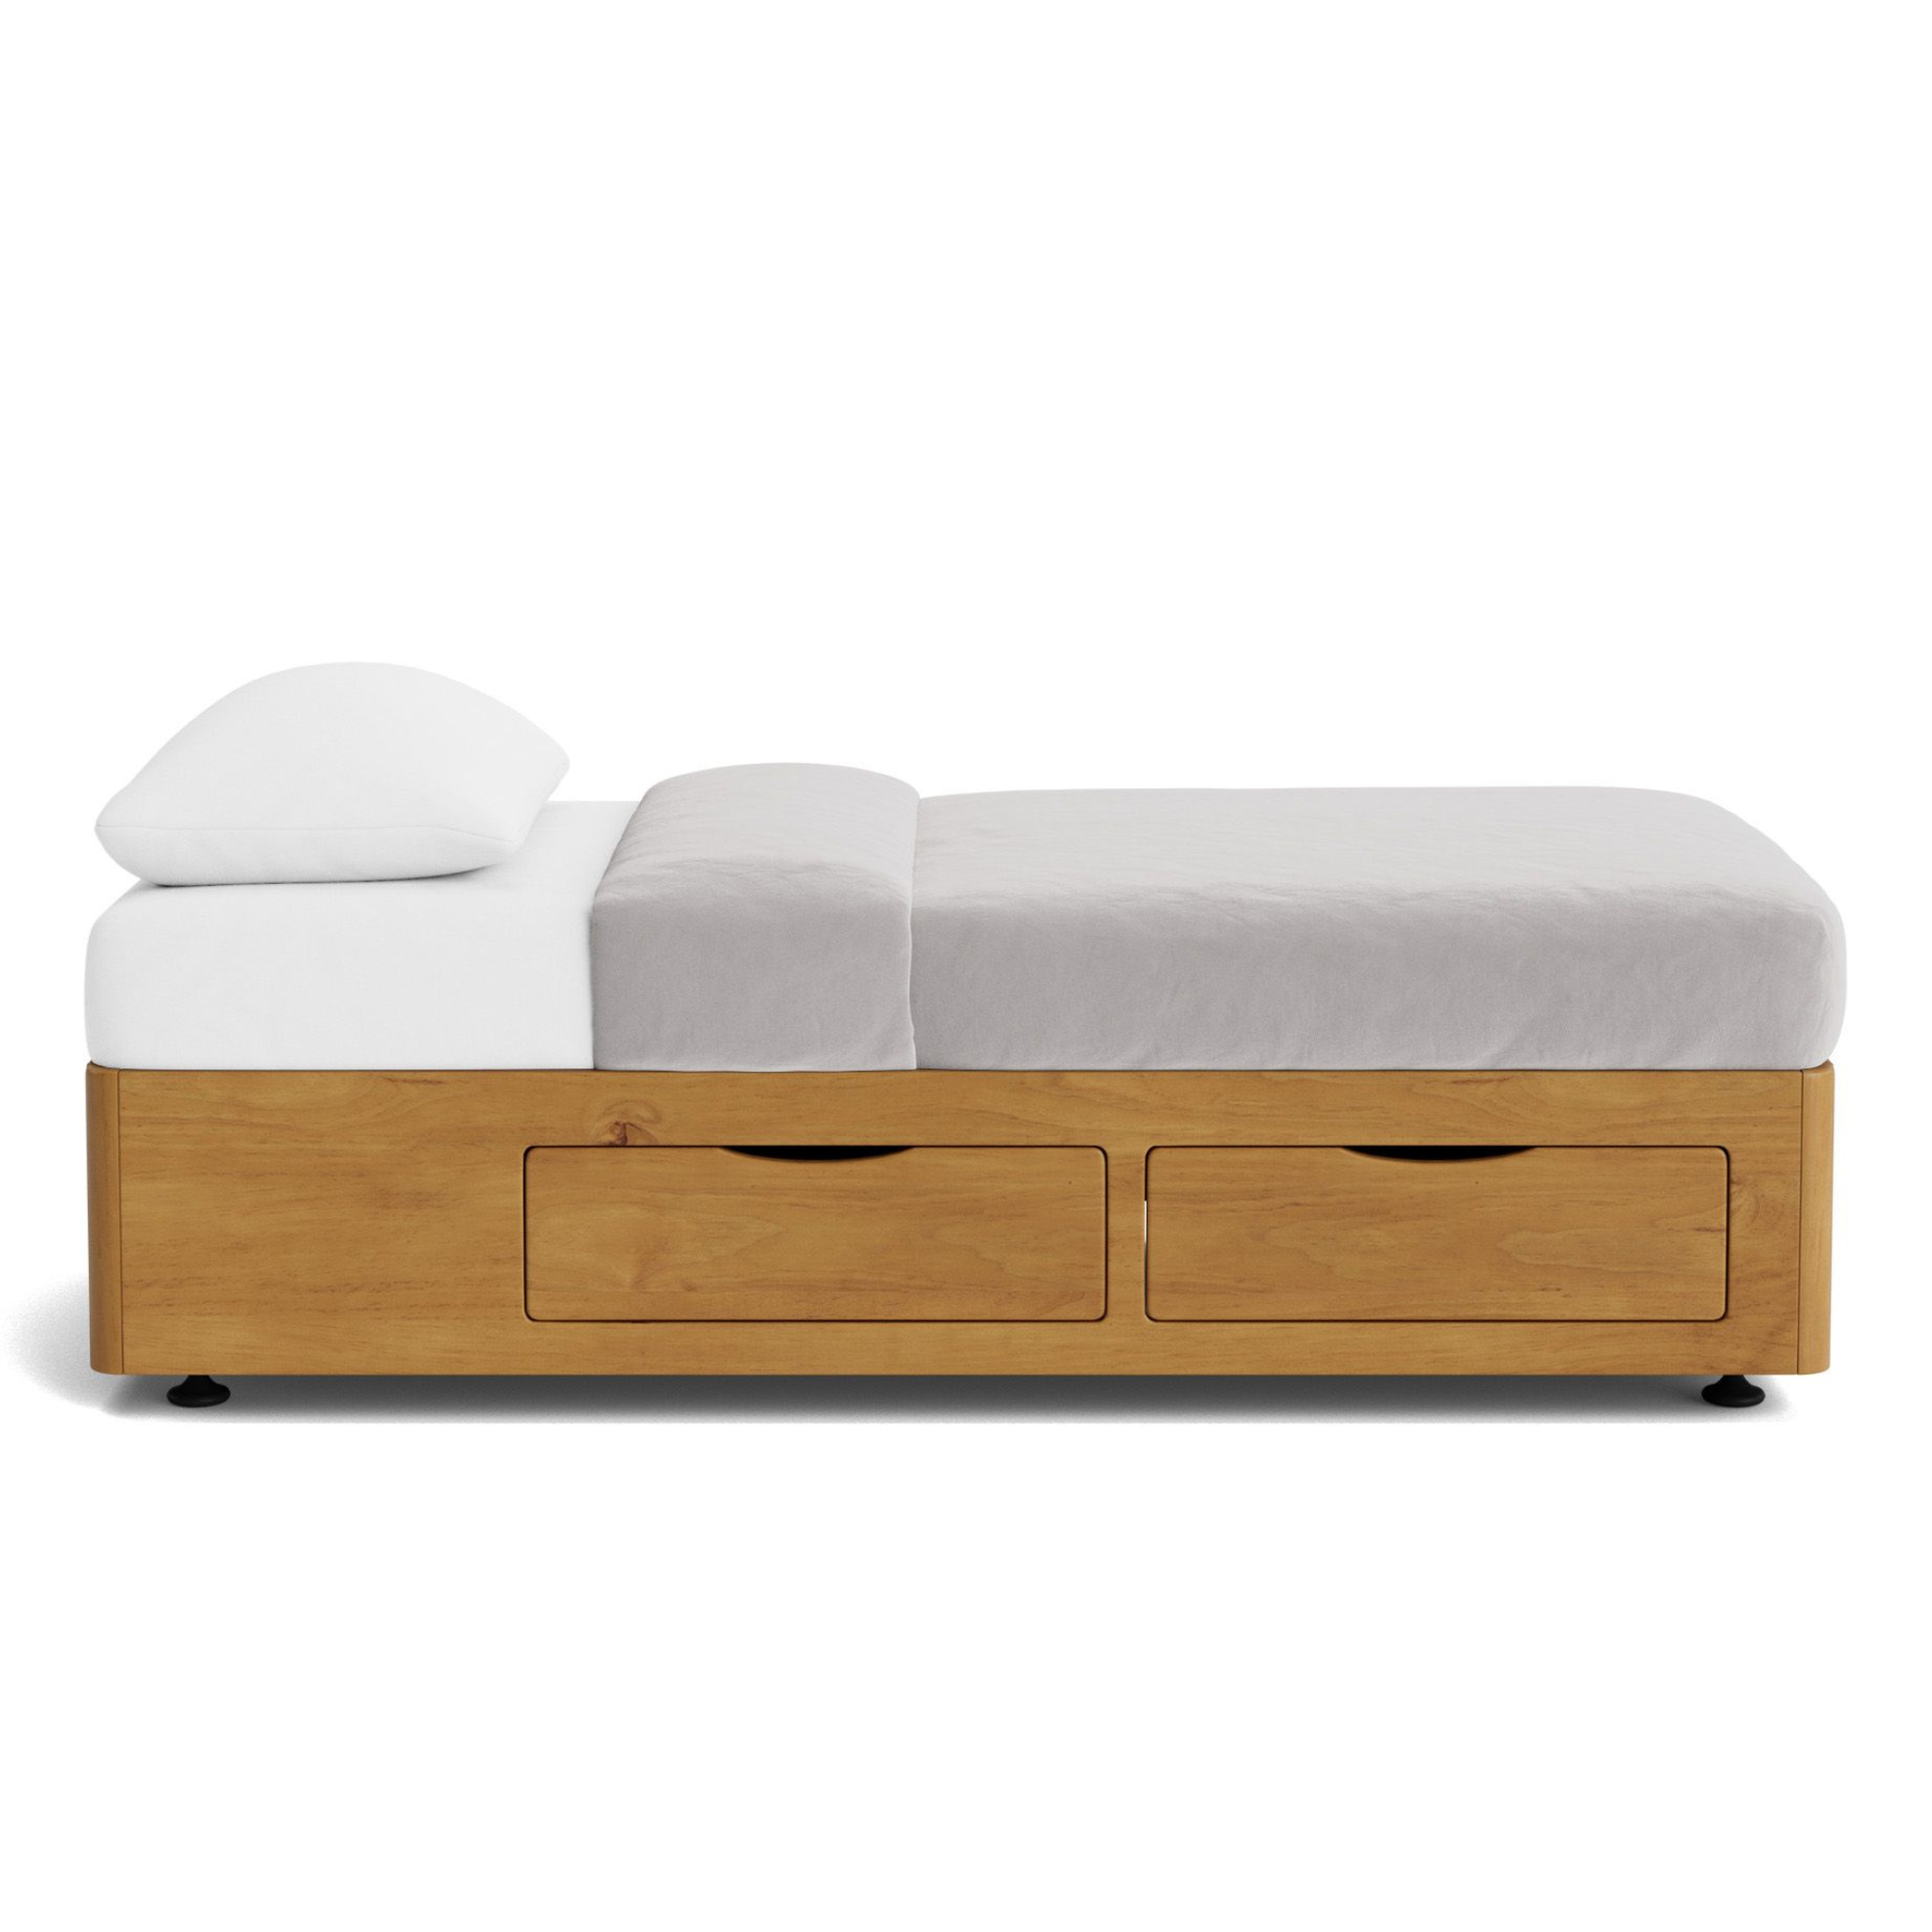 SLEEPNEAT BED BASE | DOUBLE, QUEEN, KING, SUPER KING | WITH OR WITHOUT DRAWERS | NZ MADE